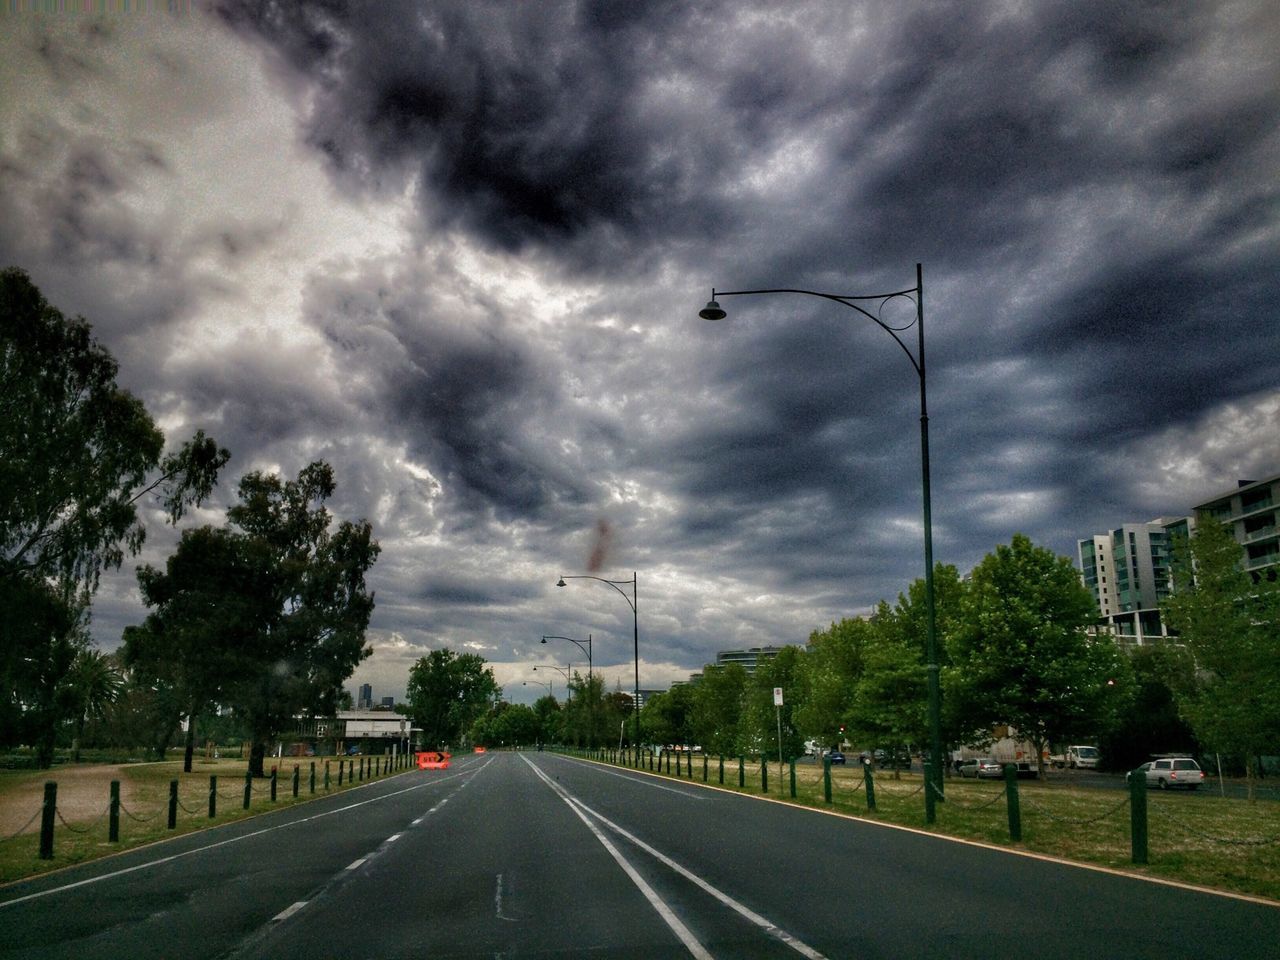 sky, the way forward, cloud - sky, cloudy, road, transportation, diminishing perspective, vanishing point, overcast, tree, road marking, cloud, storm cloud, weather, street, empty road, empty, country road, nature, street light